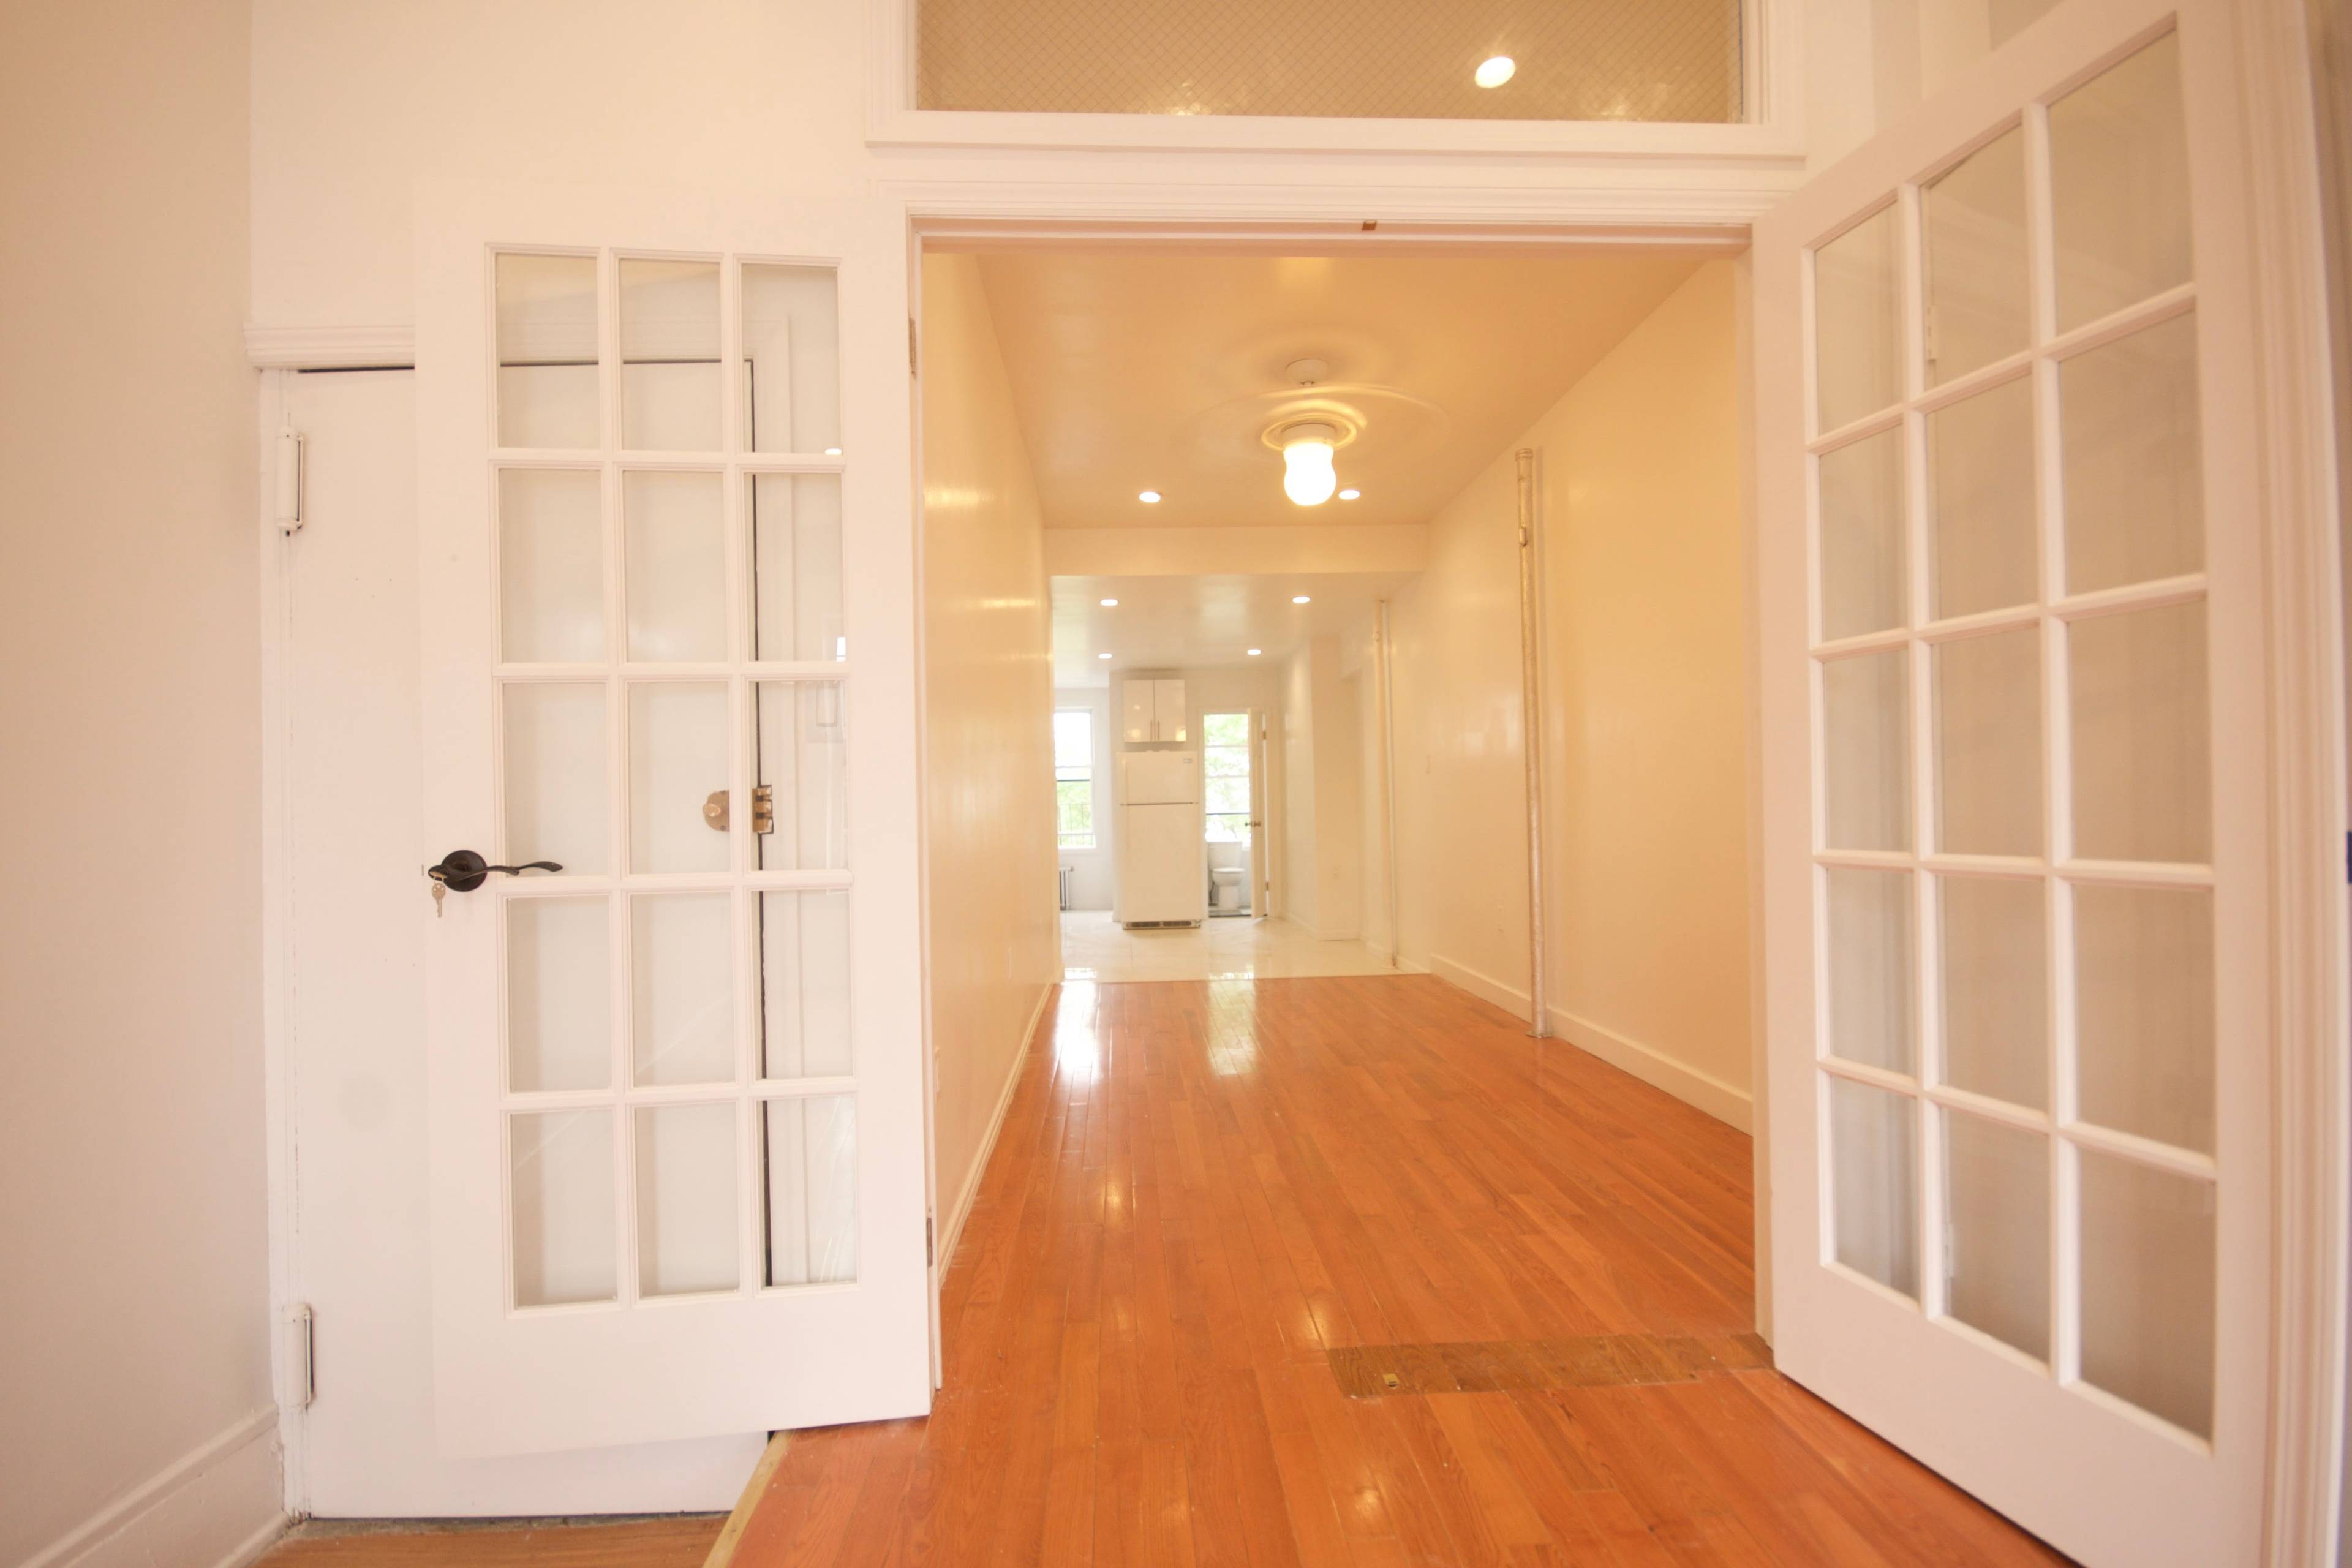 HUGE, RECENTLY RENOVATED 1BR IN THE HIPPEST PART OF THE BURG!